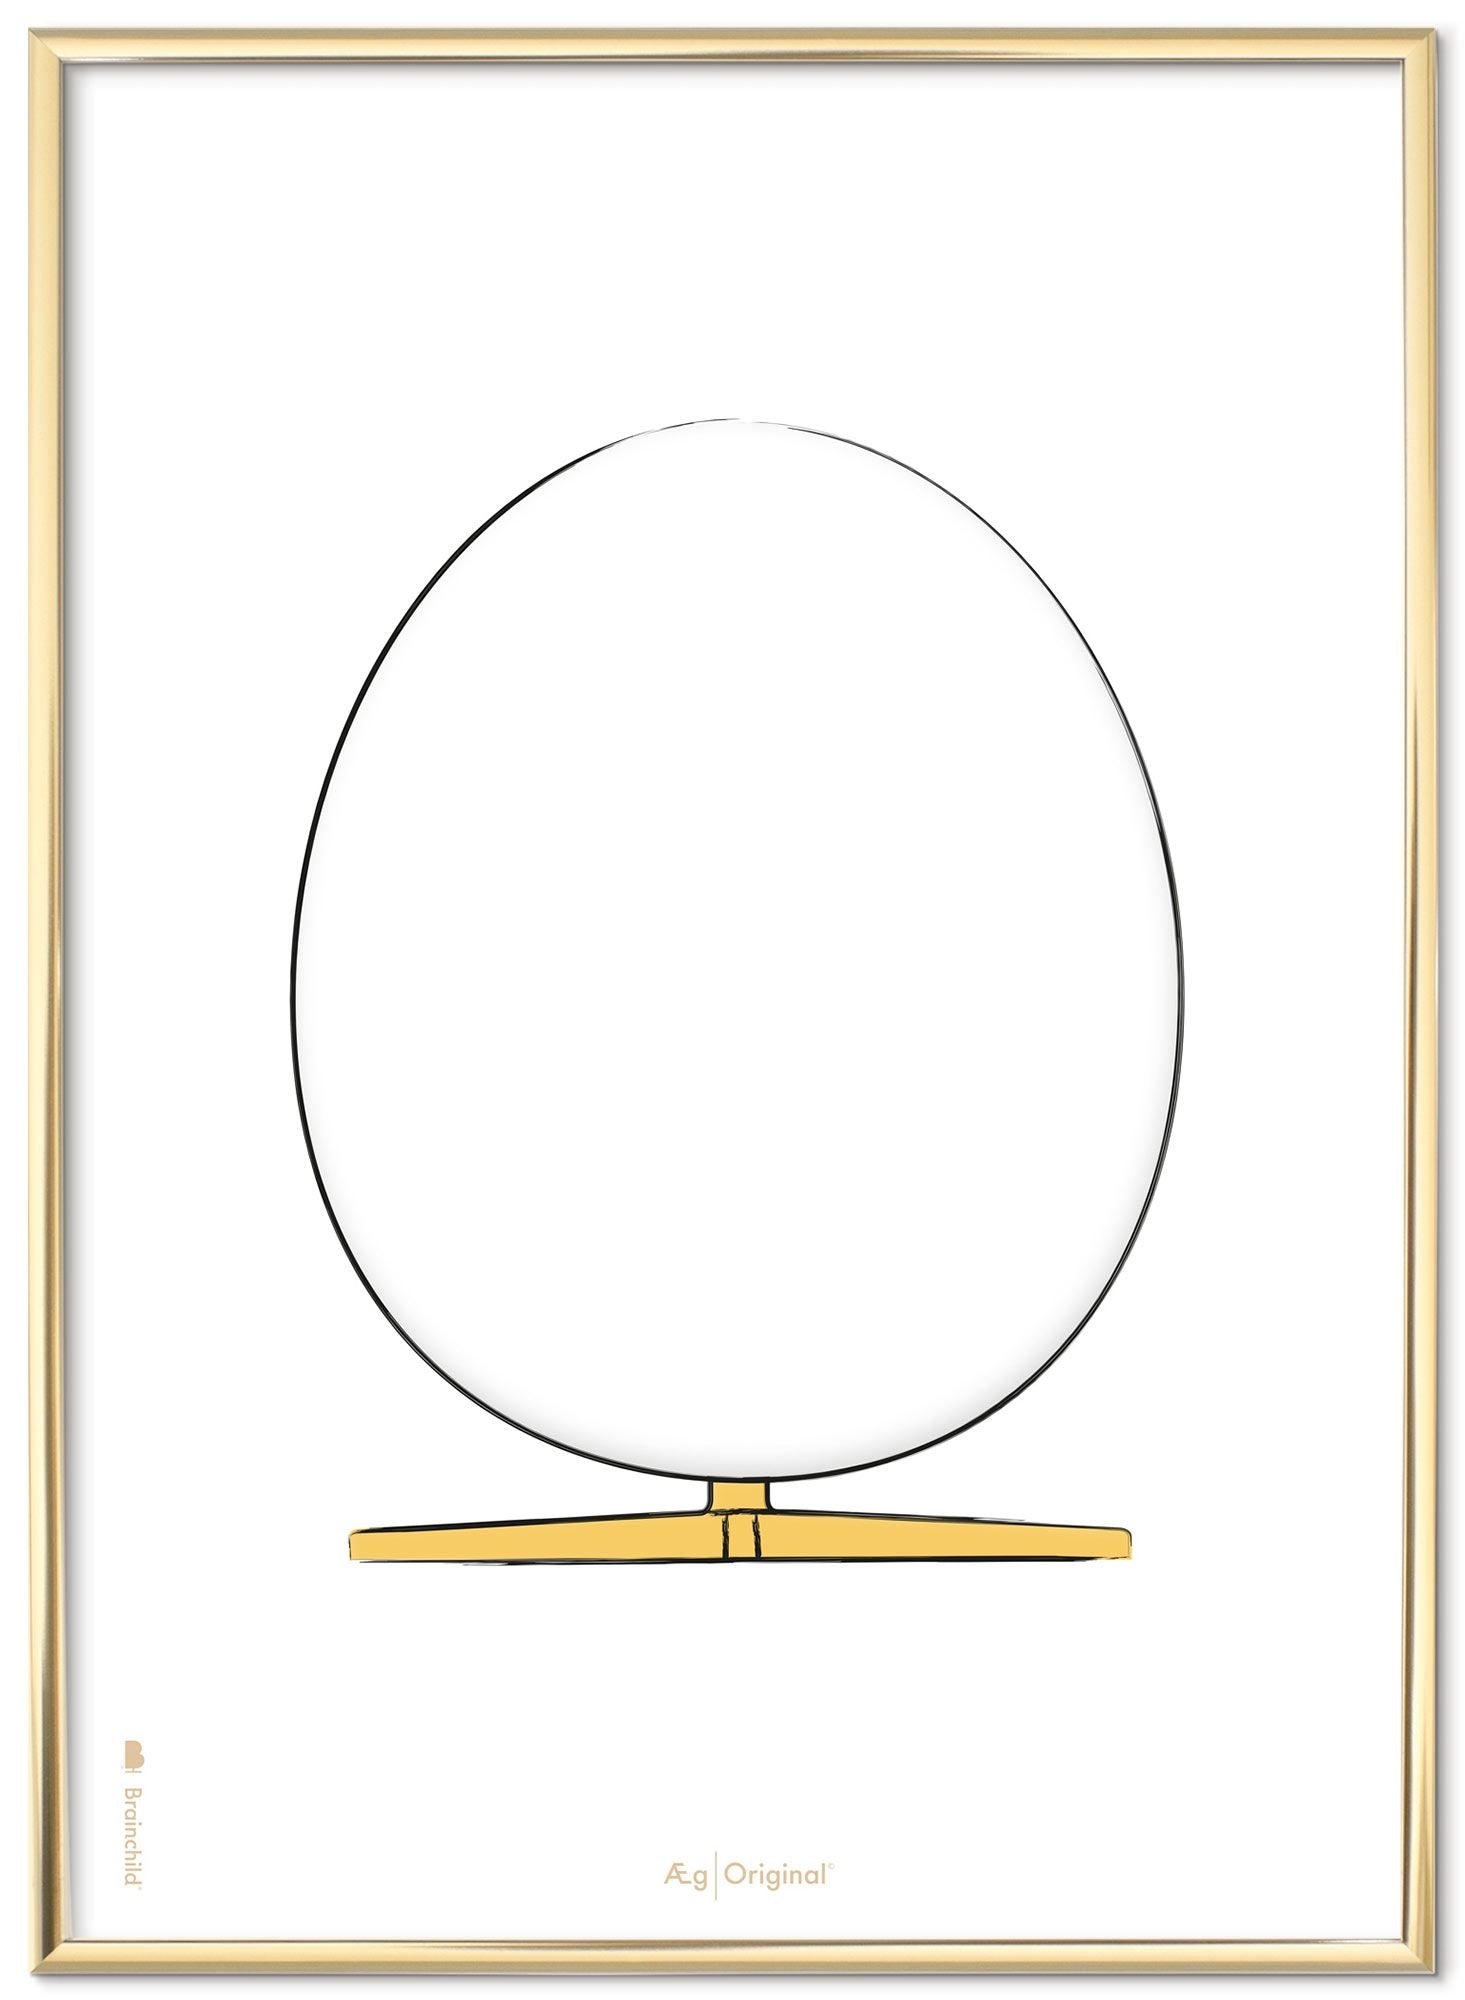 Brainchild The Egg Design Sketch Poster With Frame Made Of Brass Colored Metal A5, White Background